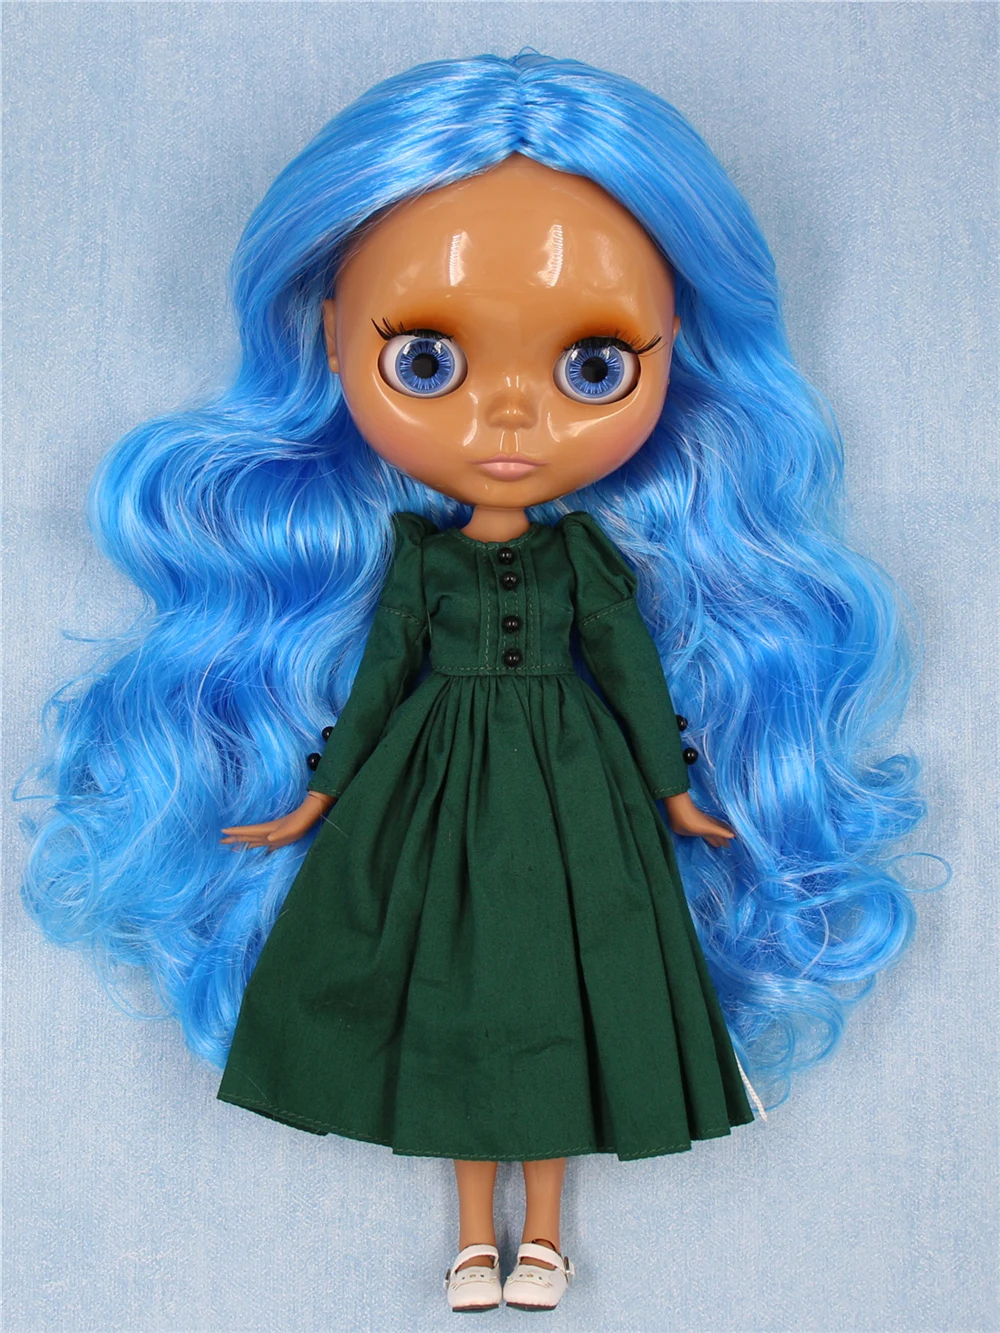 Neo Blythe Doll with Blue Hair, Dark Skin, Shiny Face & Jointed Body 1